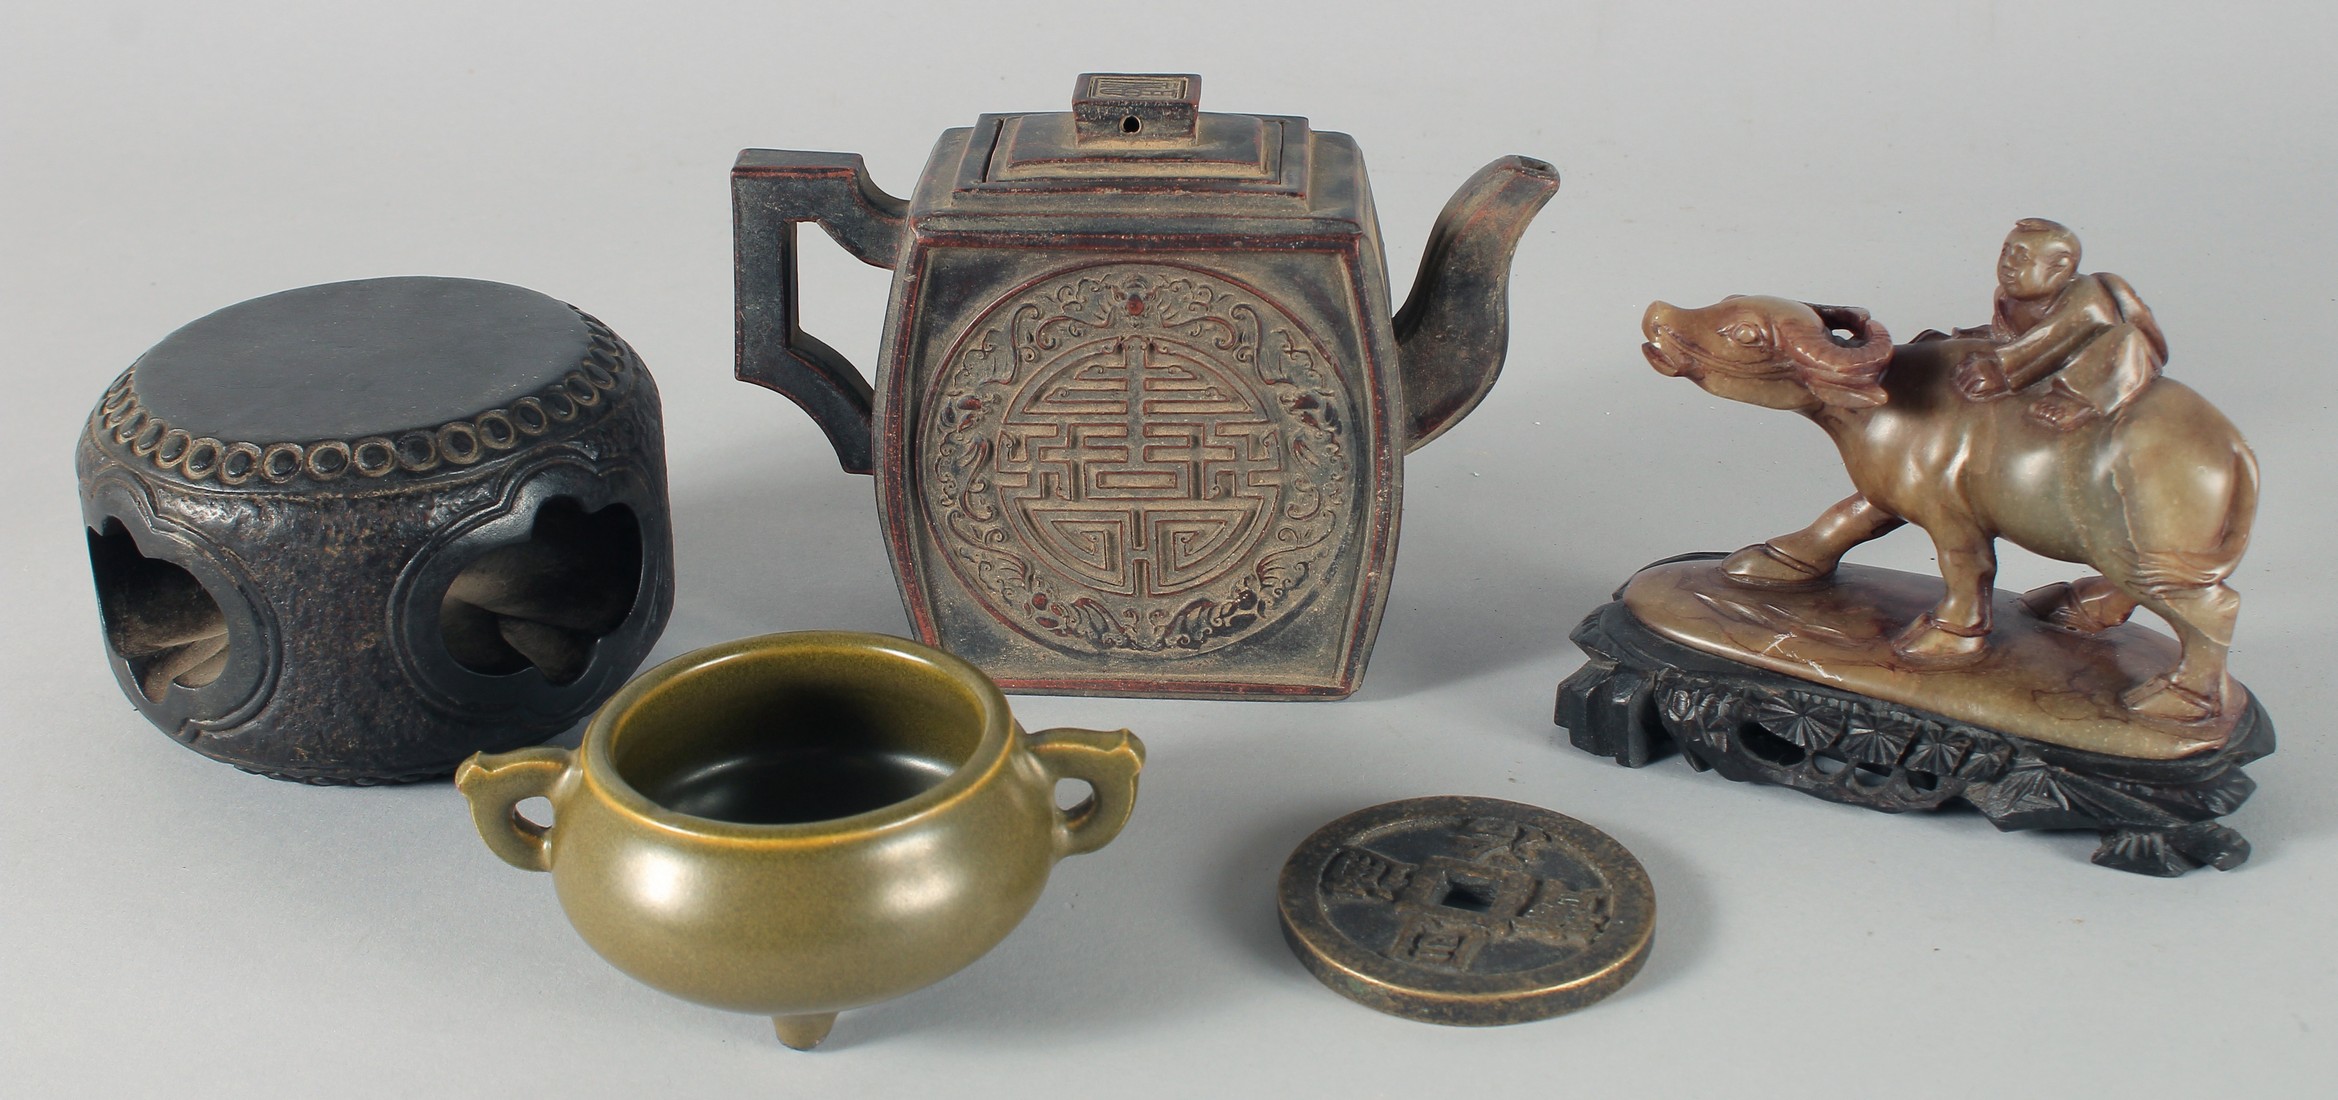 A MIXED COLLECTION OF CHINESE ITEMS, comprising a good hardstone figure mounted to a wooden base,